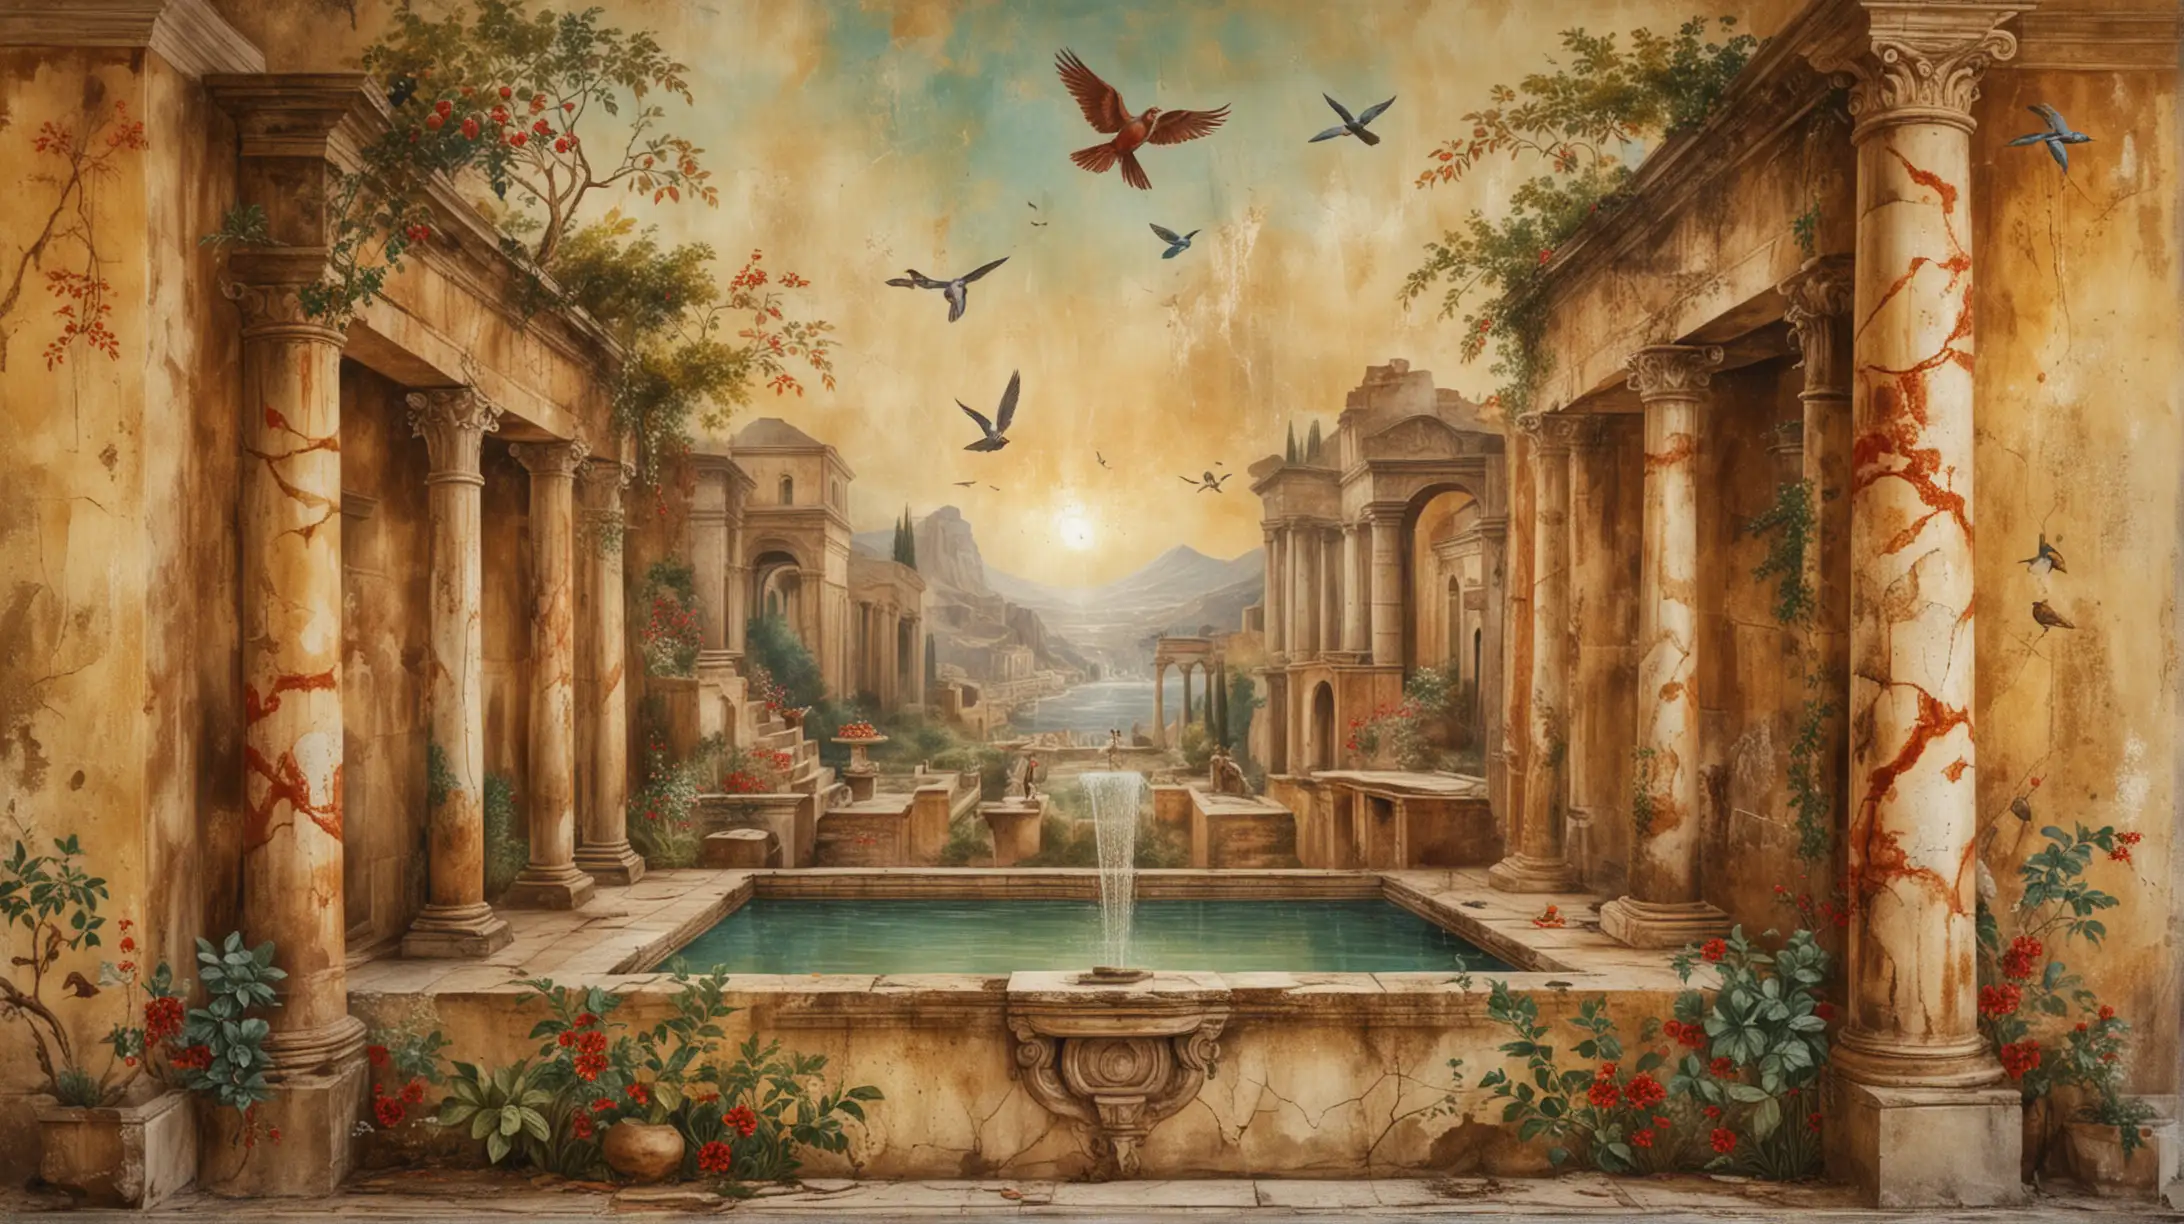 villa (Ancient city of Pompei)  wall with magnificent and imposing wall-painting, mural-painting (fresco), 3D wax encaustic,  with representative birds,  fountain, landscape, very beautiful, faded, cracked, aged texture